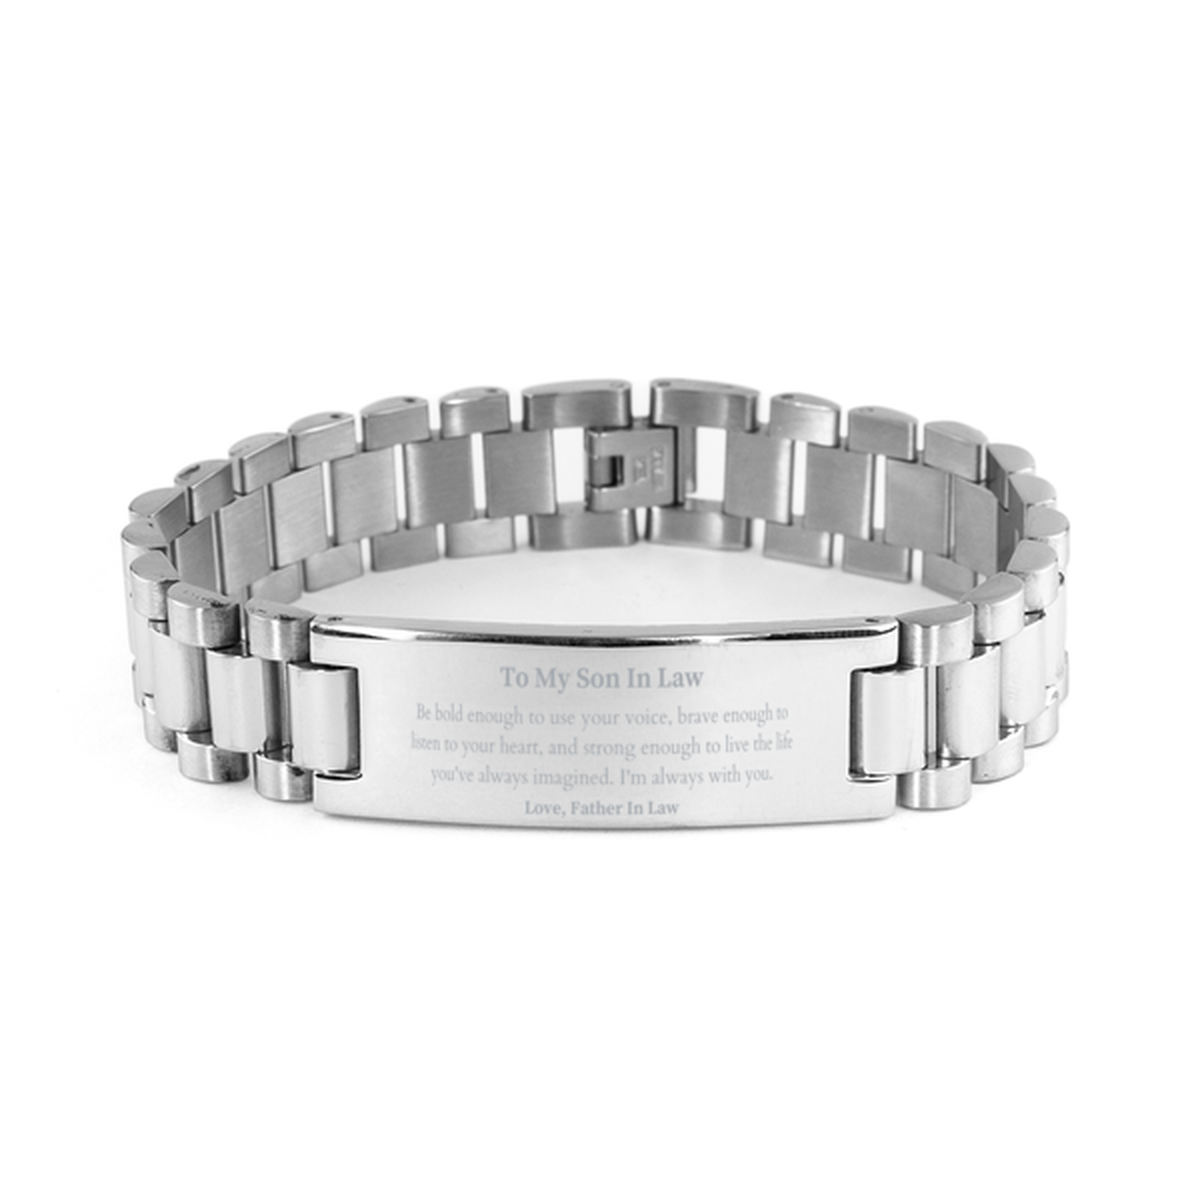 Keepsake Son In Law Ladder Stainless Steel Bracelet Gift Idea Graduation Christmas Birthday Son In Law from Father In Law, Son In Law Be bold enough to use your voice, brave enough to listen to your heart. Love, Father In Law